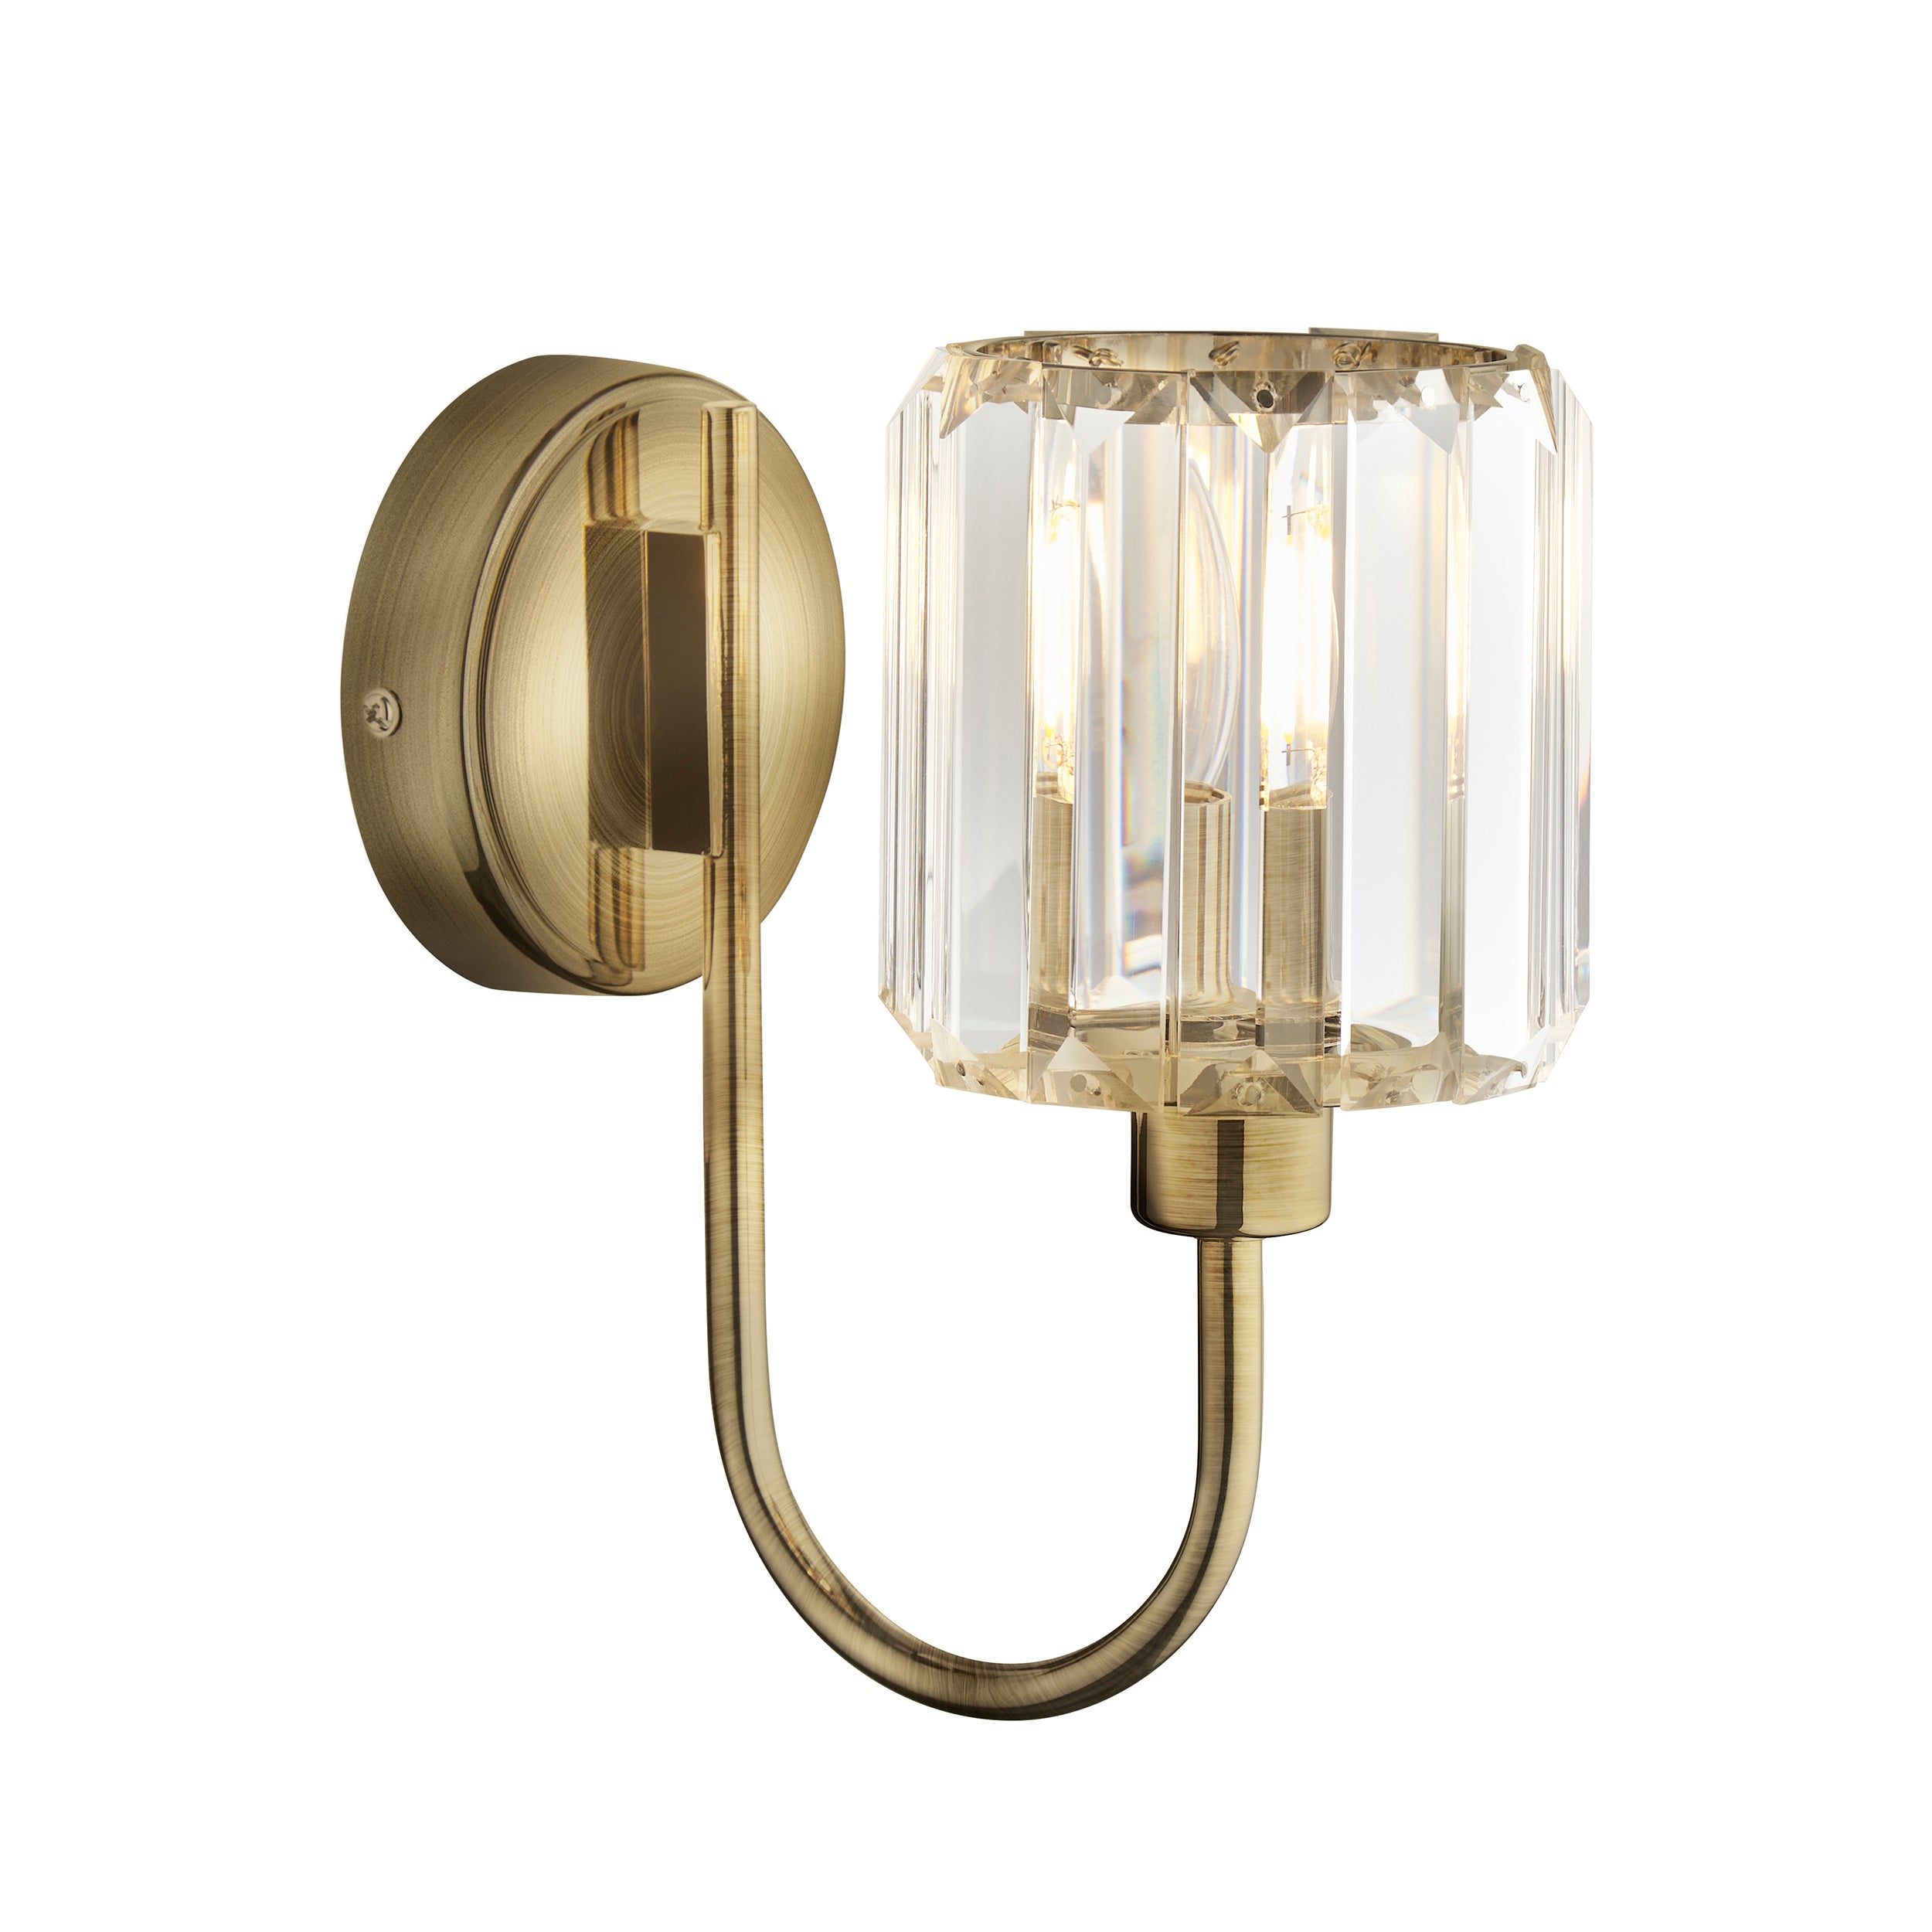 Berenice Sophisticated Antique Brass Wall Light